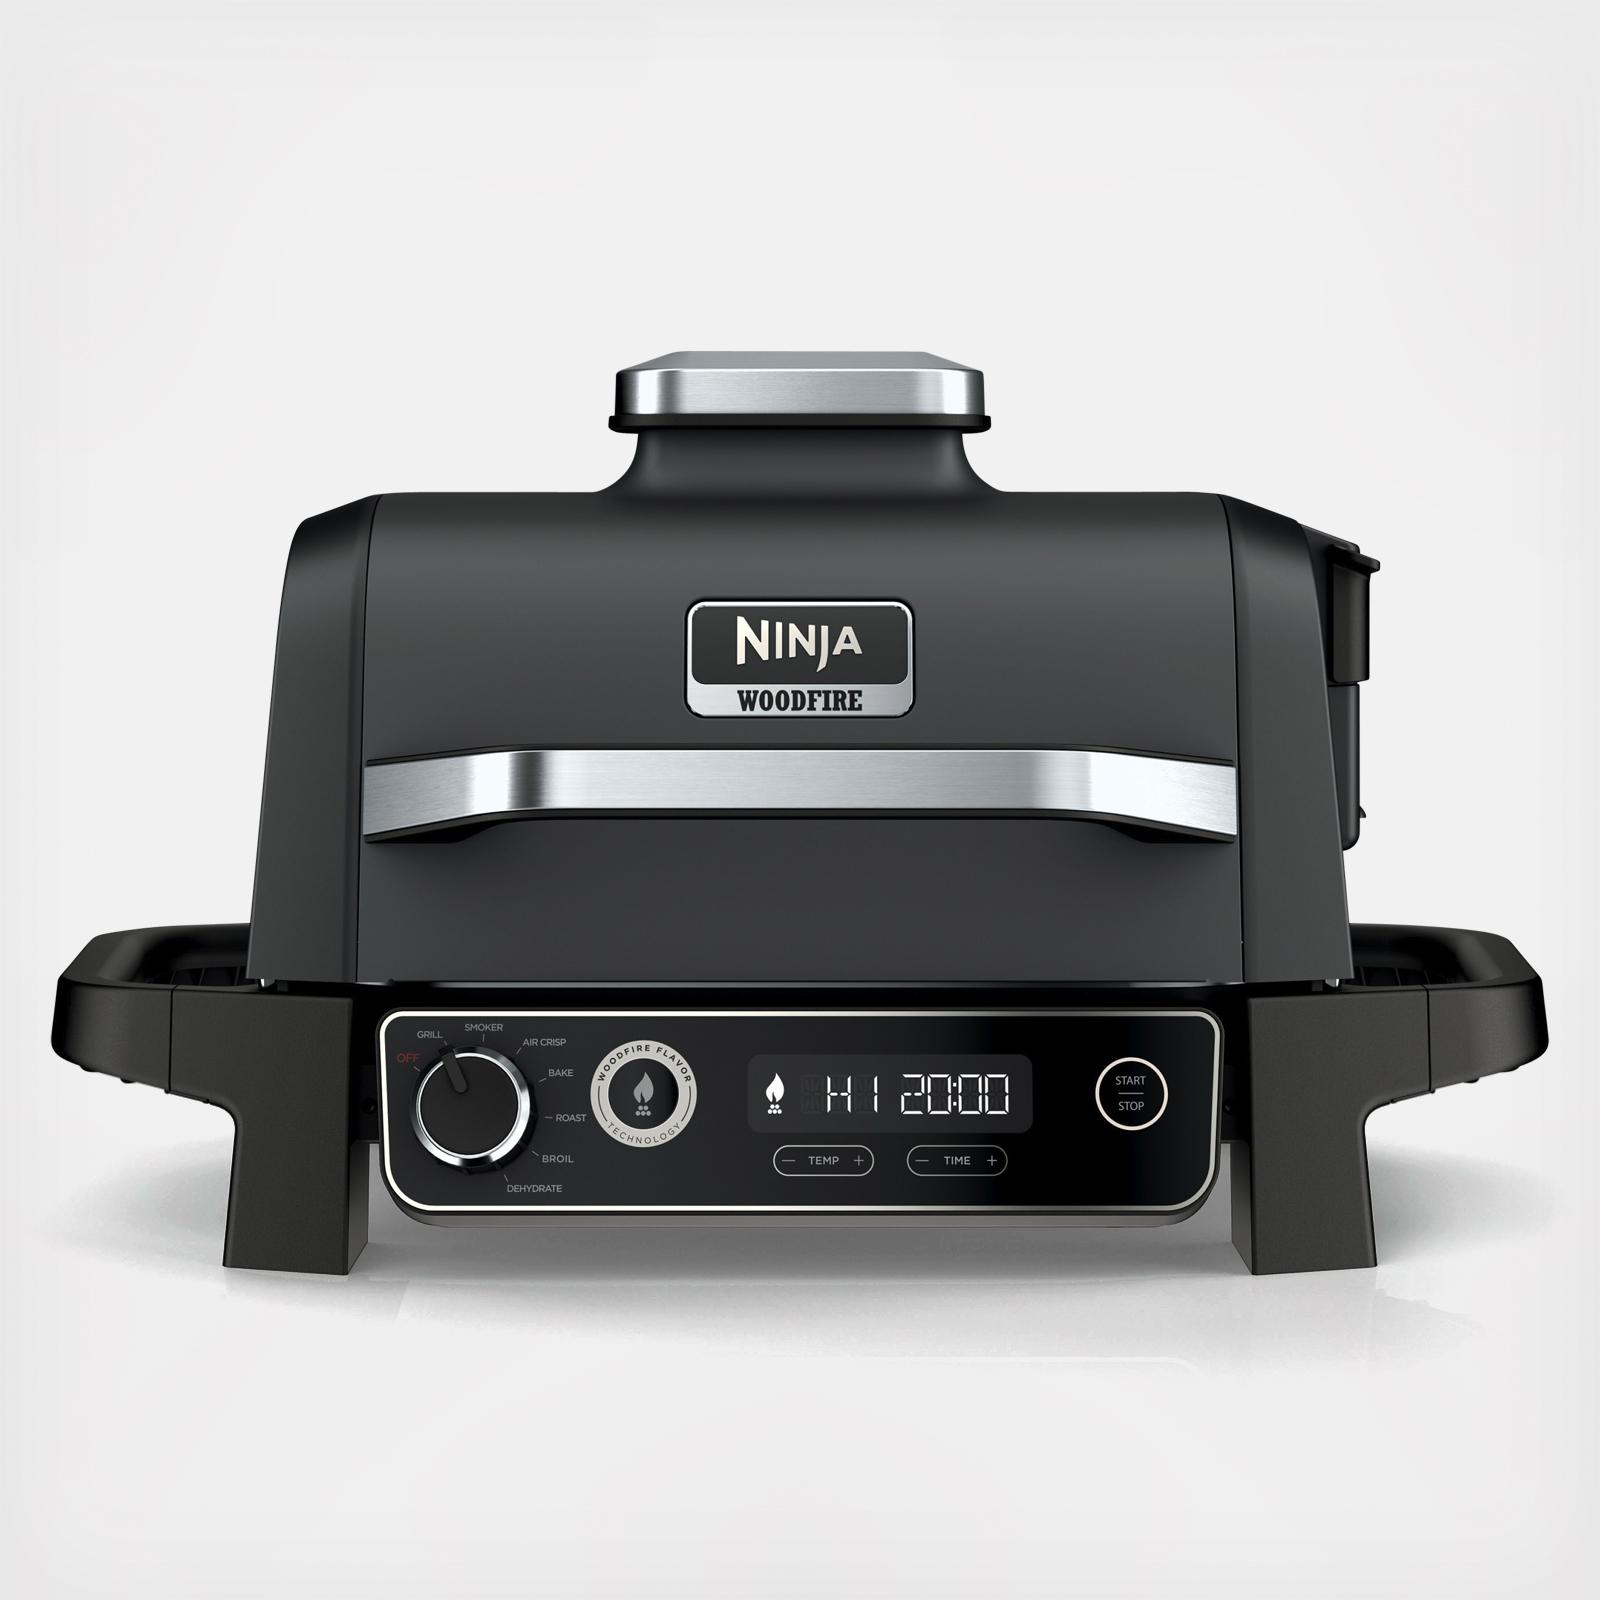 Ninja Woodfire Pro Outdoor Grill & Smoker with Built-In Thermometer, 7-in-1  Master Grill, BBQ Smoker, Air Fryer, Bake, Roast, Dehydrate, Broil, Ninja